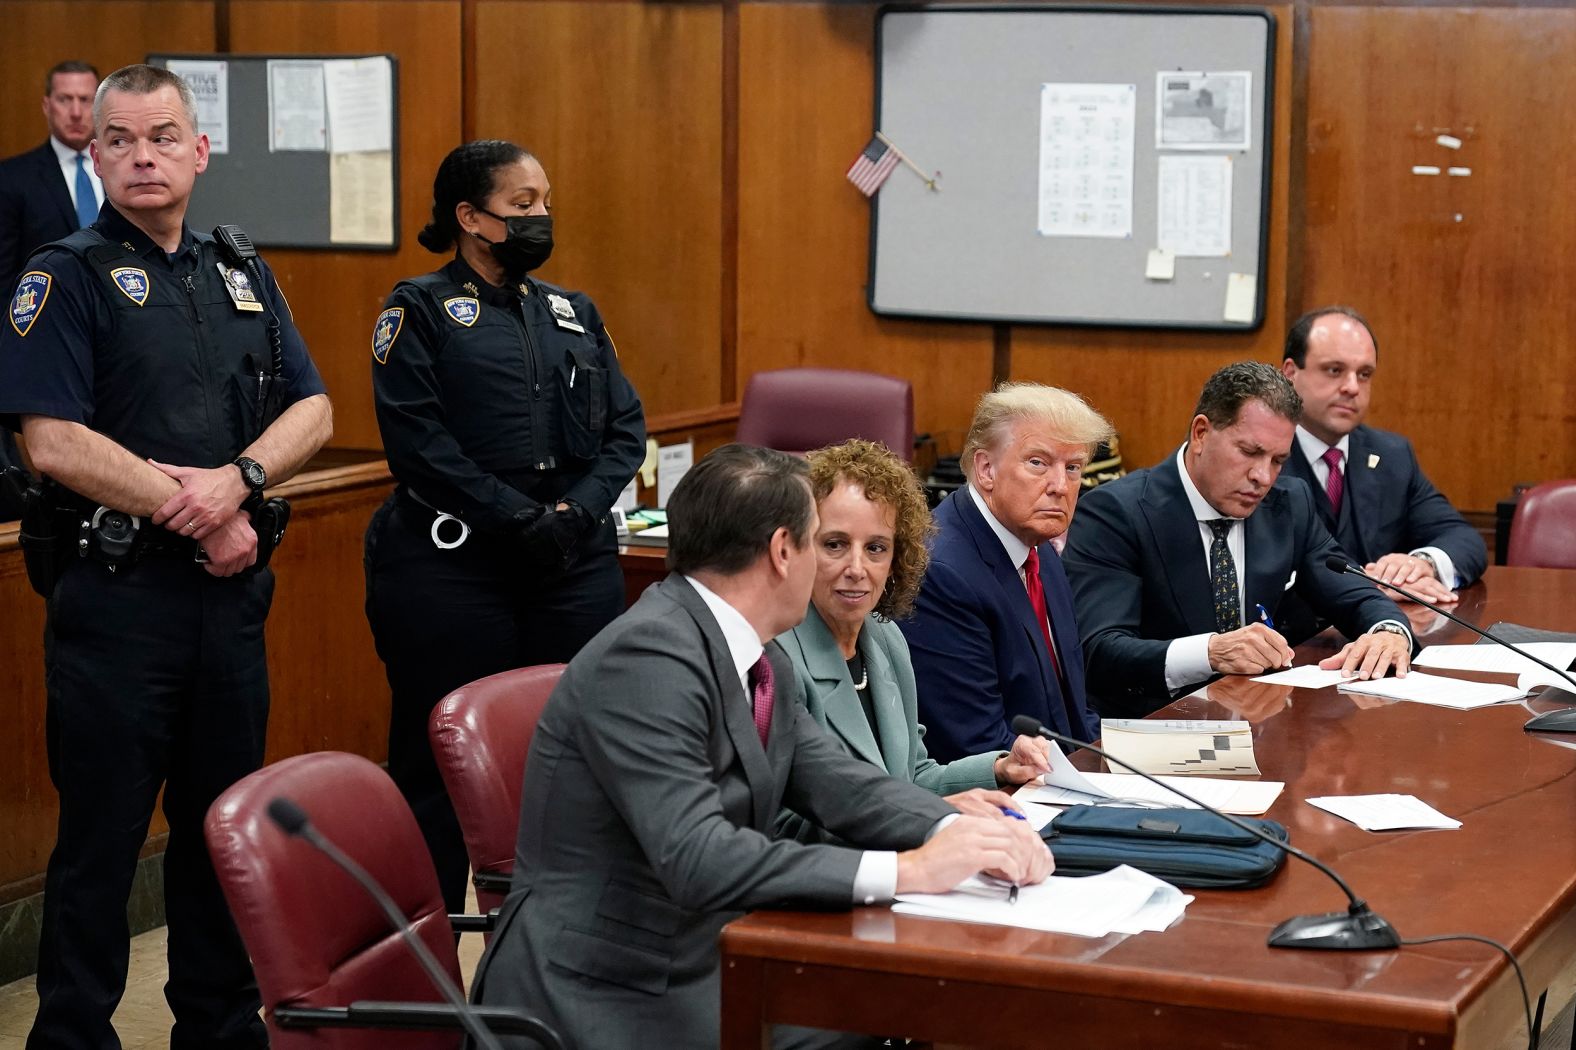 Trump sits with his defense team at his arraignment in New York in April 2023. The former president <a href="index.php?page=&url=http%3A%2F%2Fwww.cnn.com%2F2023%2F03%2F31%2Fpolitics%2Fgallery%2Ftrump-indictment%2Findex.html" target="_blank">pleaded not guilty</a> to 34 felony criminal charges of falsifying business records. It is the first time in history that a current or former US president has been criminally charged.